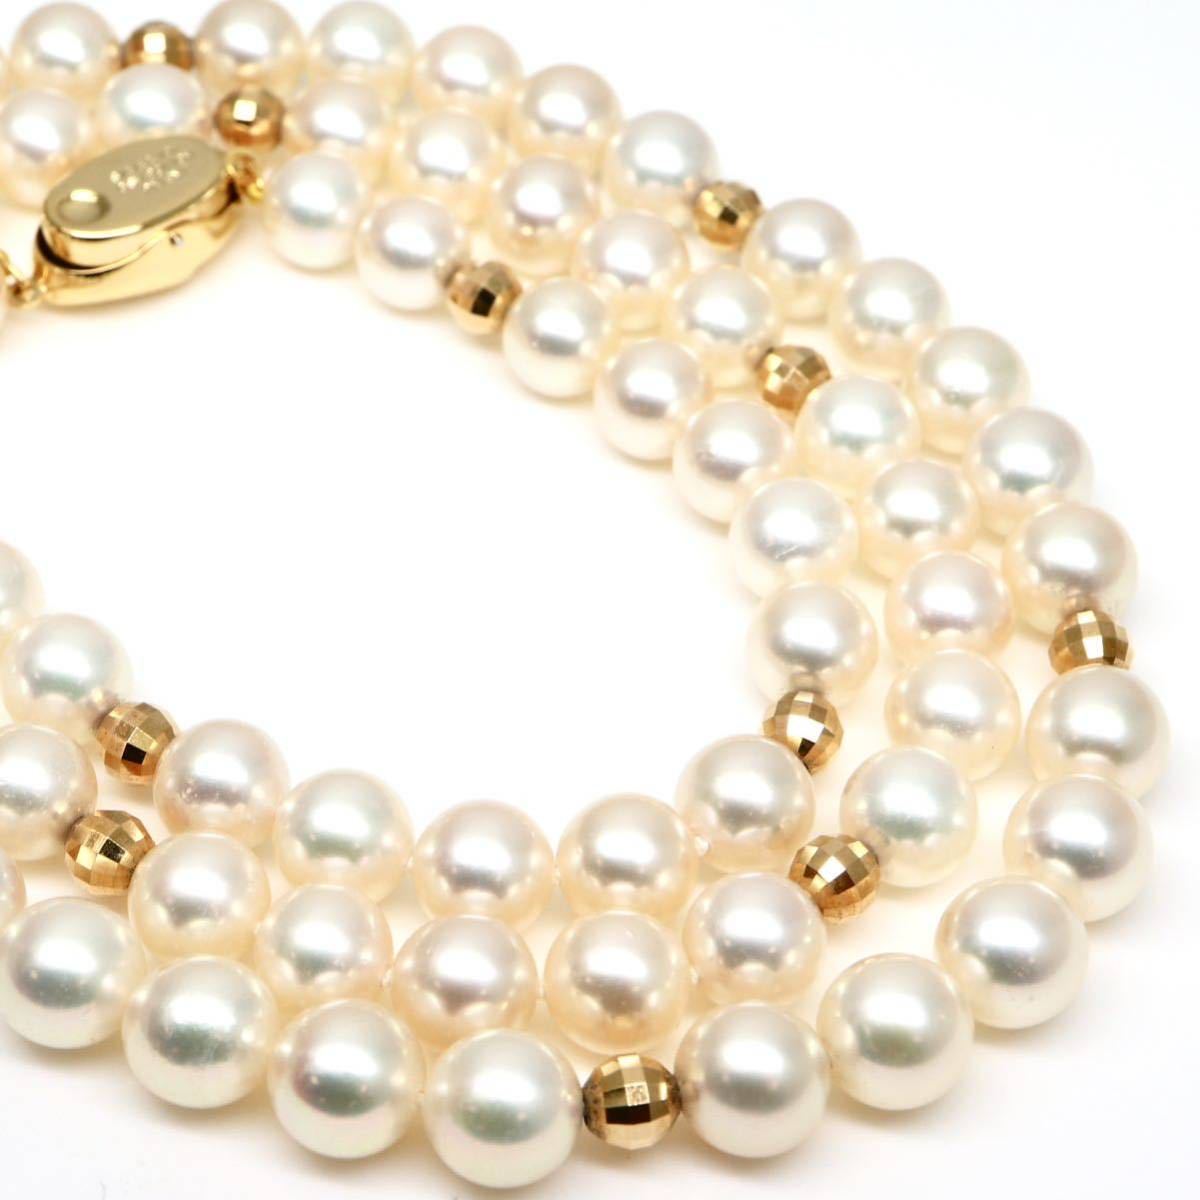 ◆K18/silverアコヤ本真珠ロングネックレス⑦◆F 約54.0g 約66.5cm 7.5-8.0.mm珠 pearl パール jewelry necklace ジュエリーEH0/ZZ_画像1